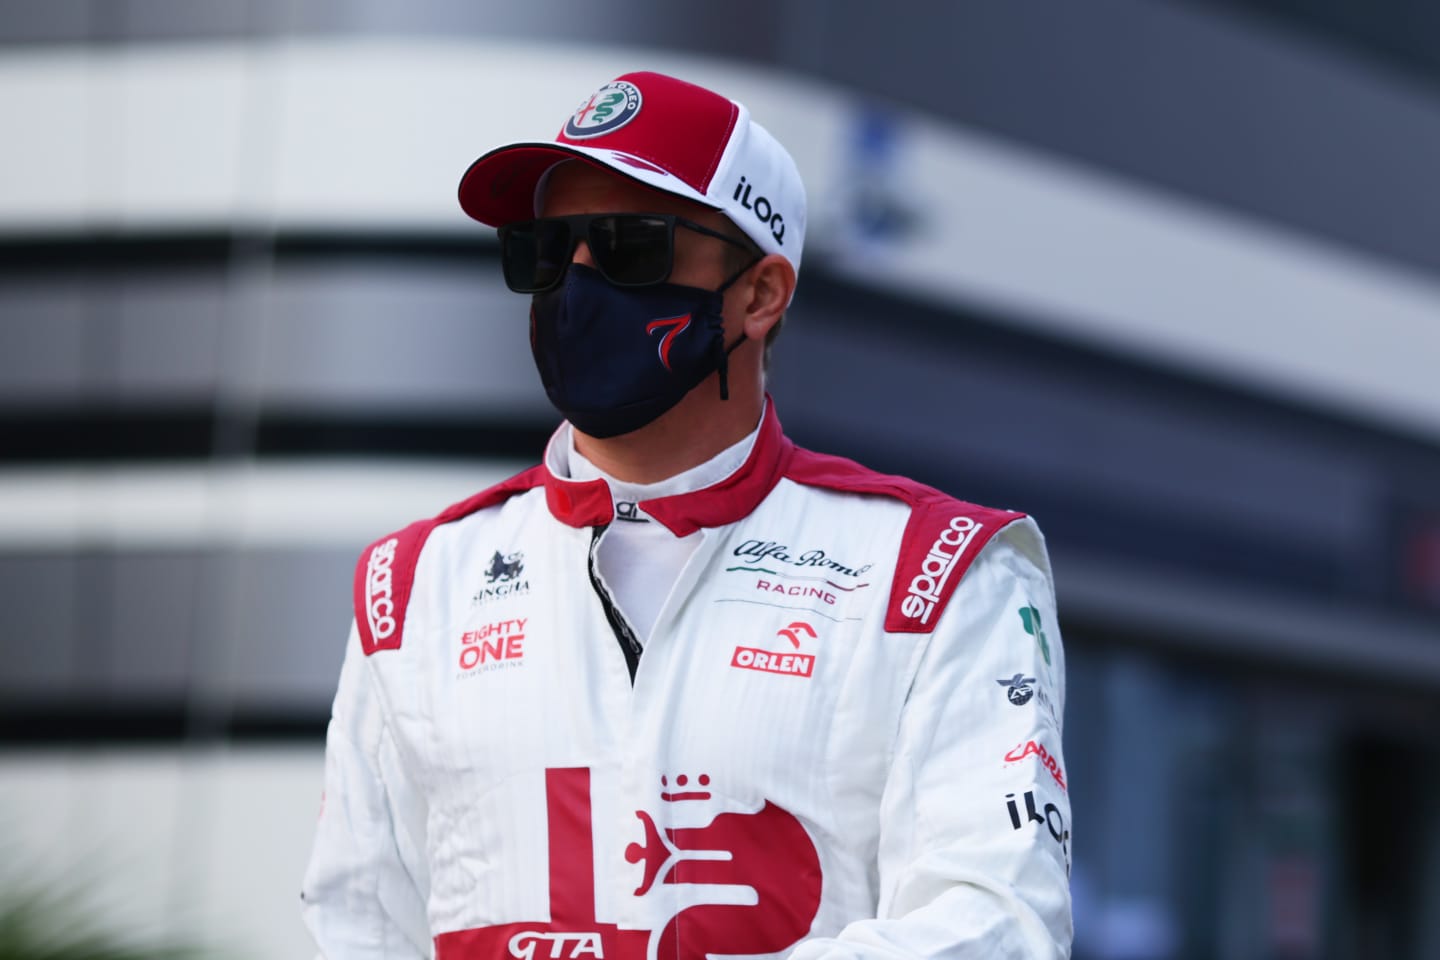 SOCHI, RUSSIA - SEPTEMBER 24: Kimi Raikkonen of Finland and Alfa Romeo Racing walks in the Paddock before practice ahead of the F1 Grand Prix of Russia at Sochi Autodrom on September 24, 2021 in Sochi, Russia. (Photo by Peter Fox/Getty Images)